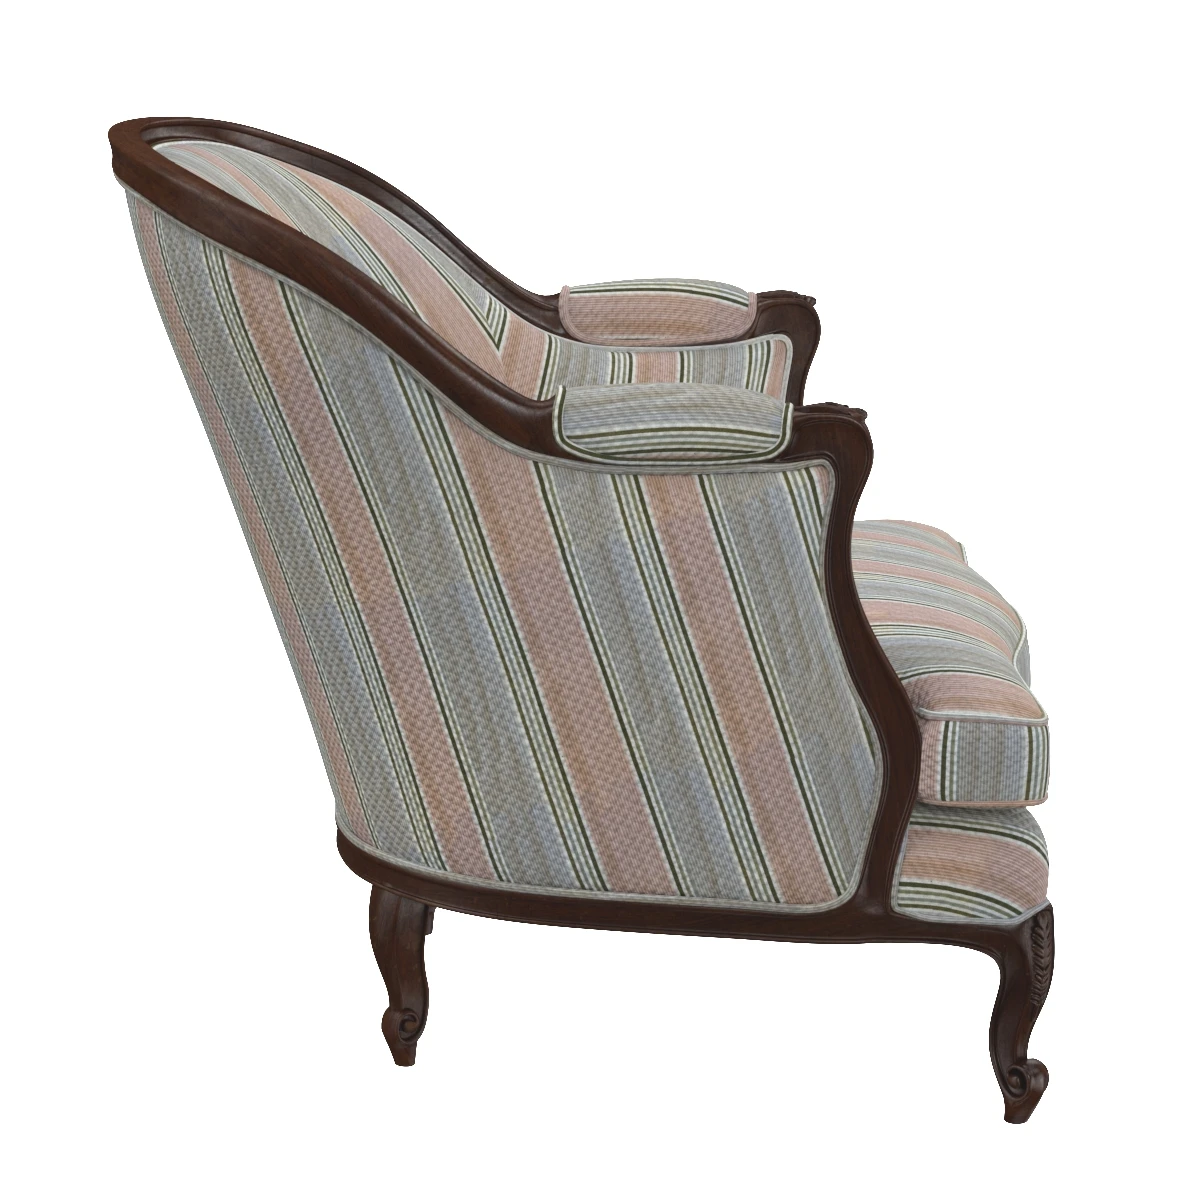 French 19th Century Walnut Bergere Chair 3D Model_04